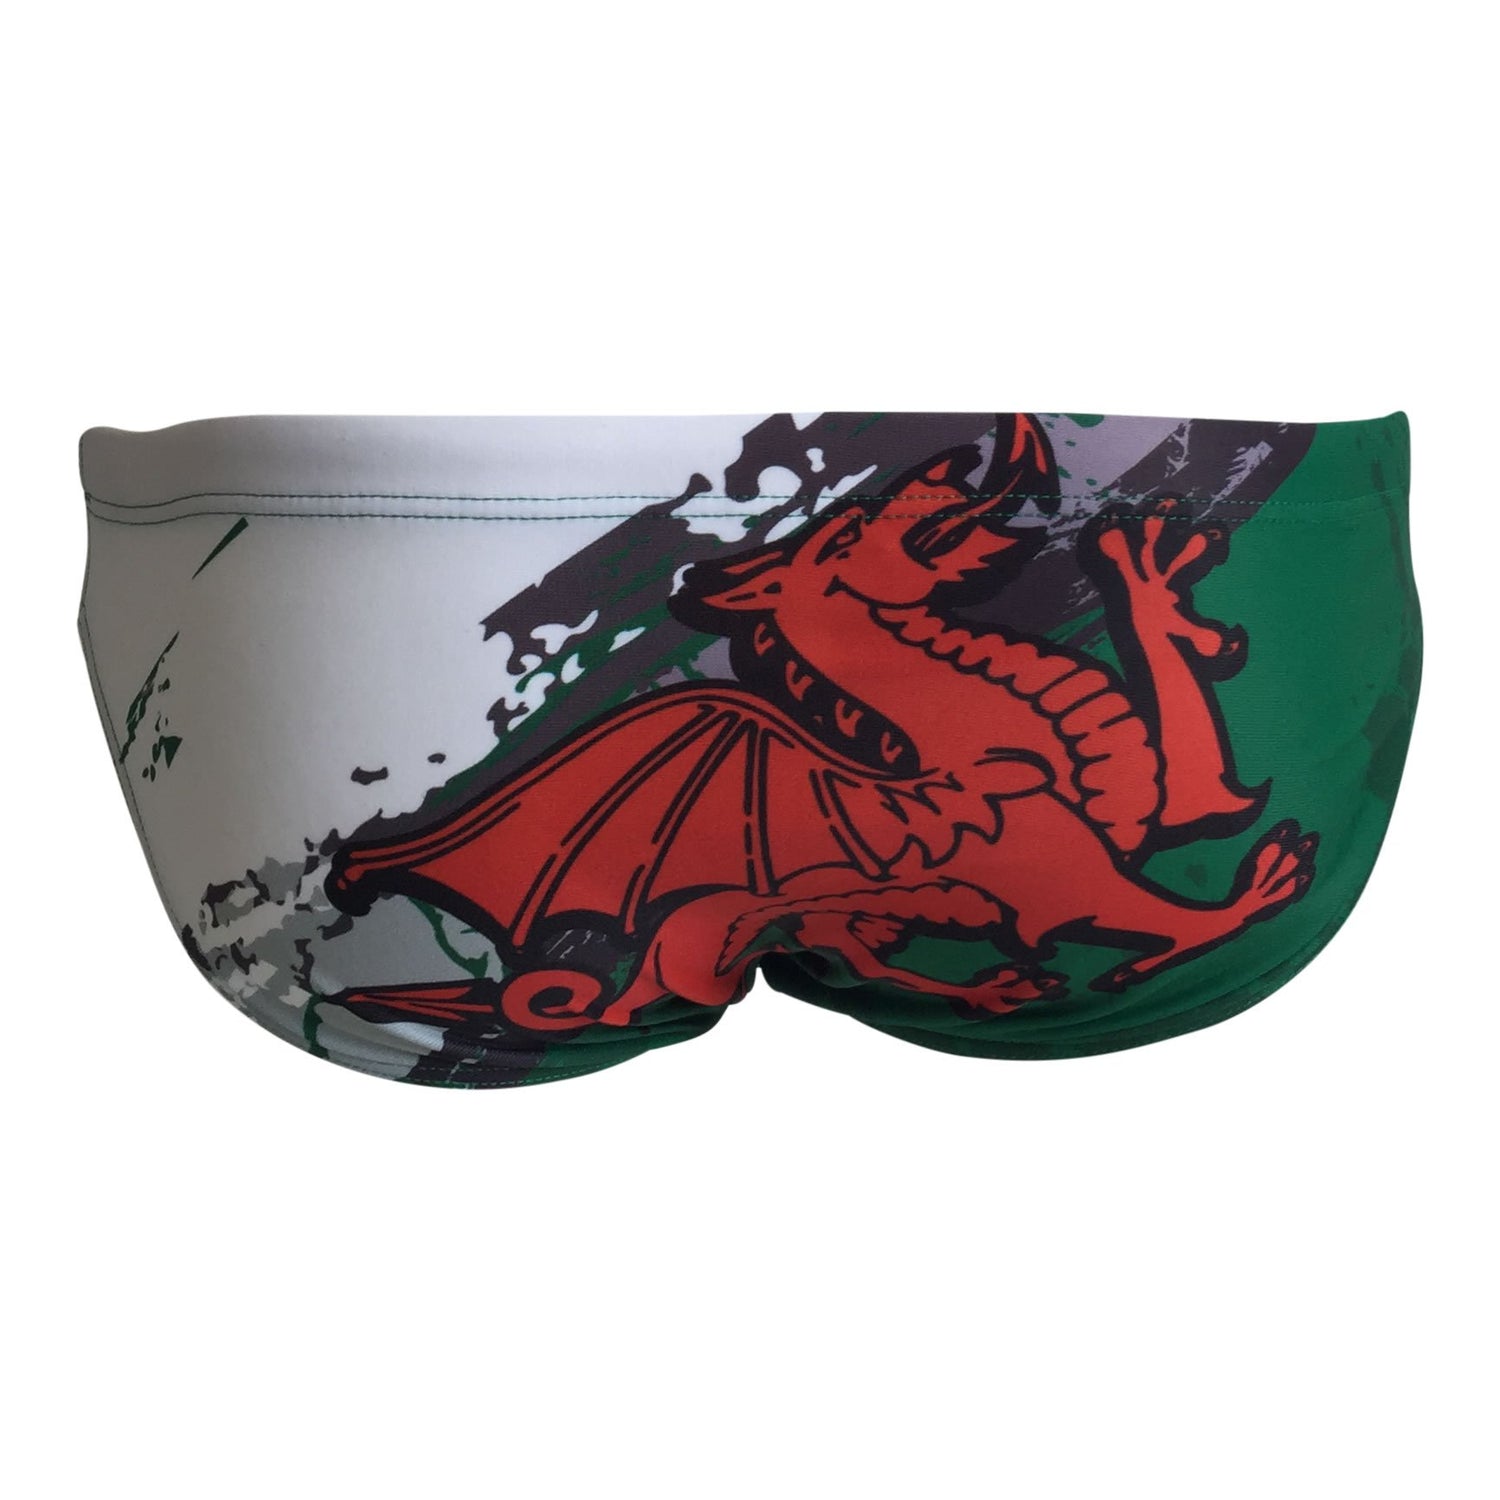 SHOALO Wales - Mens Suit - Water Polo - back